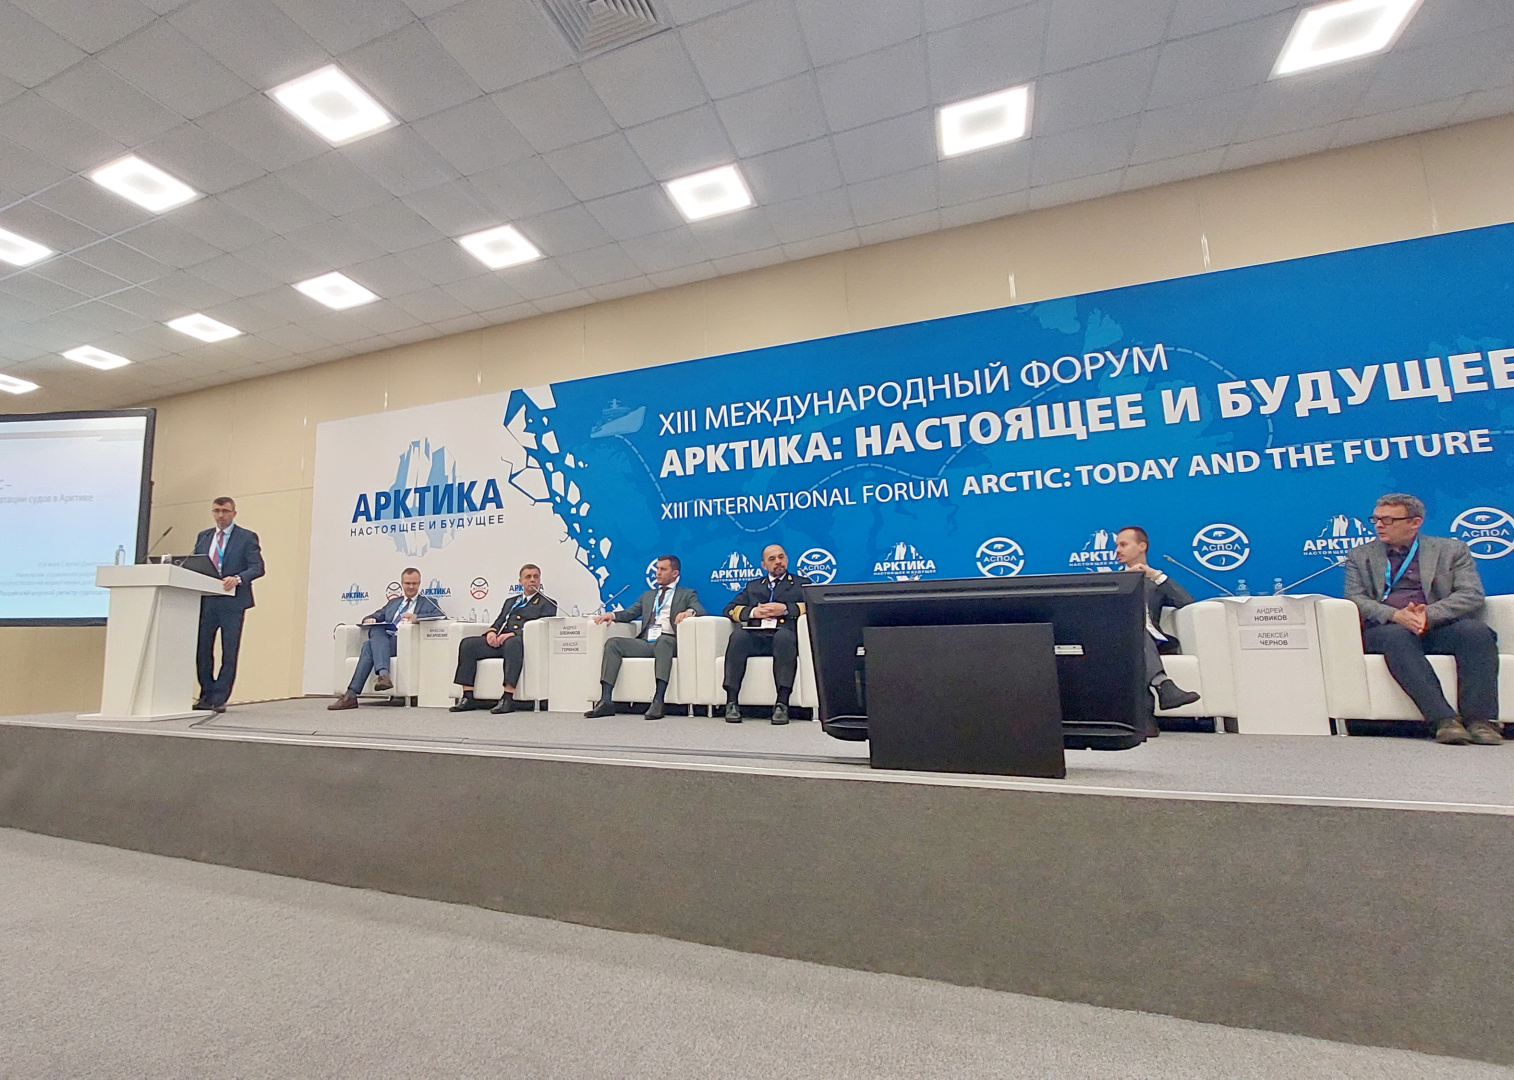 RS takes part in the XIII International Forum Arctic: Today and the Future